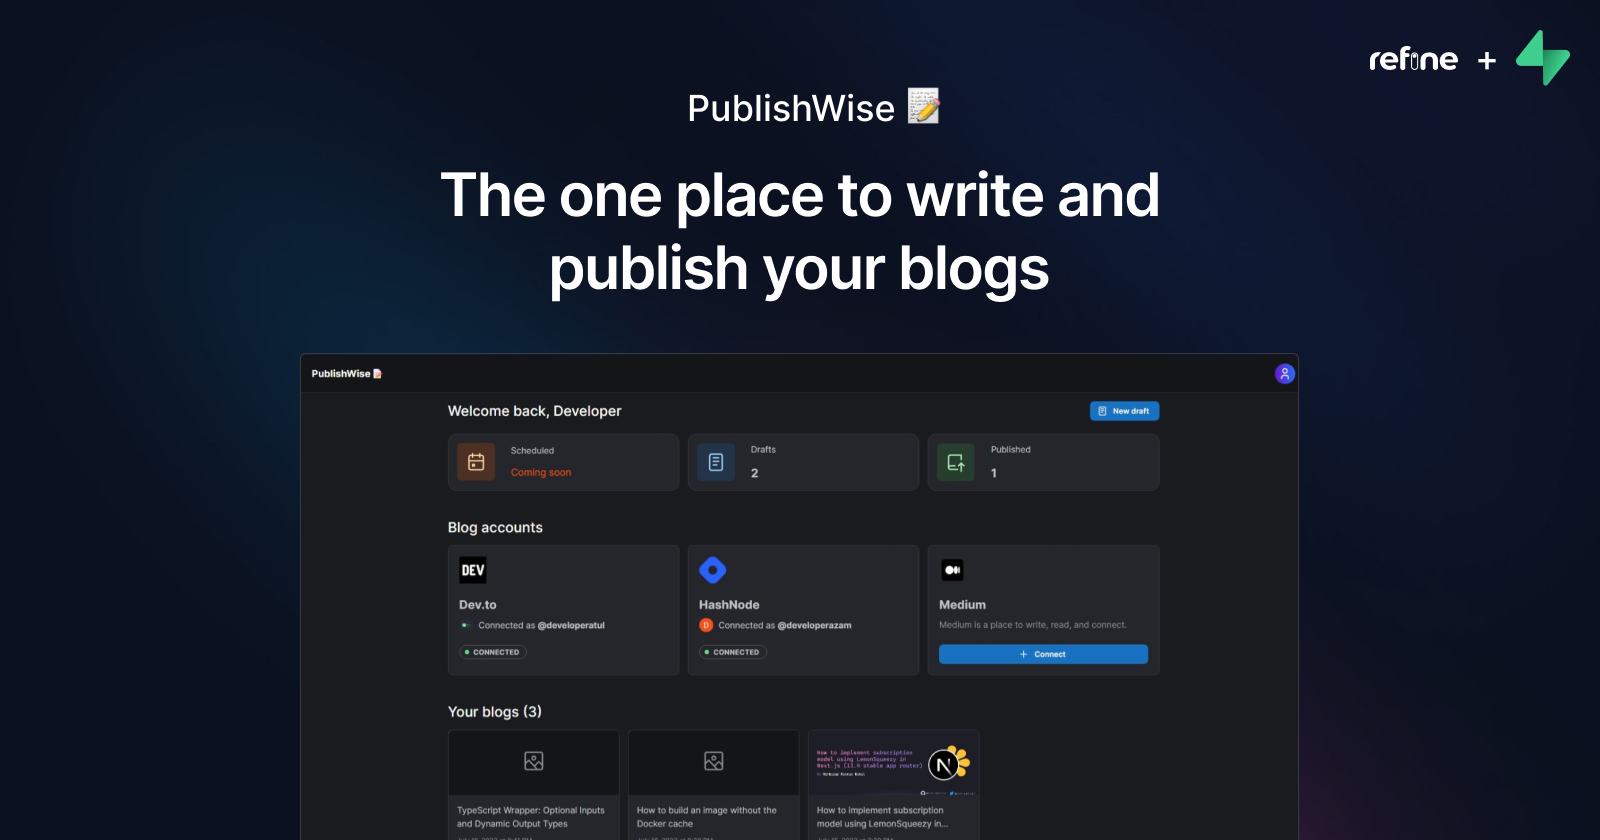 PublishWise: The one place to write and publish your blogs